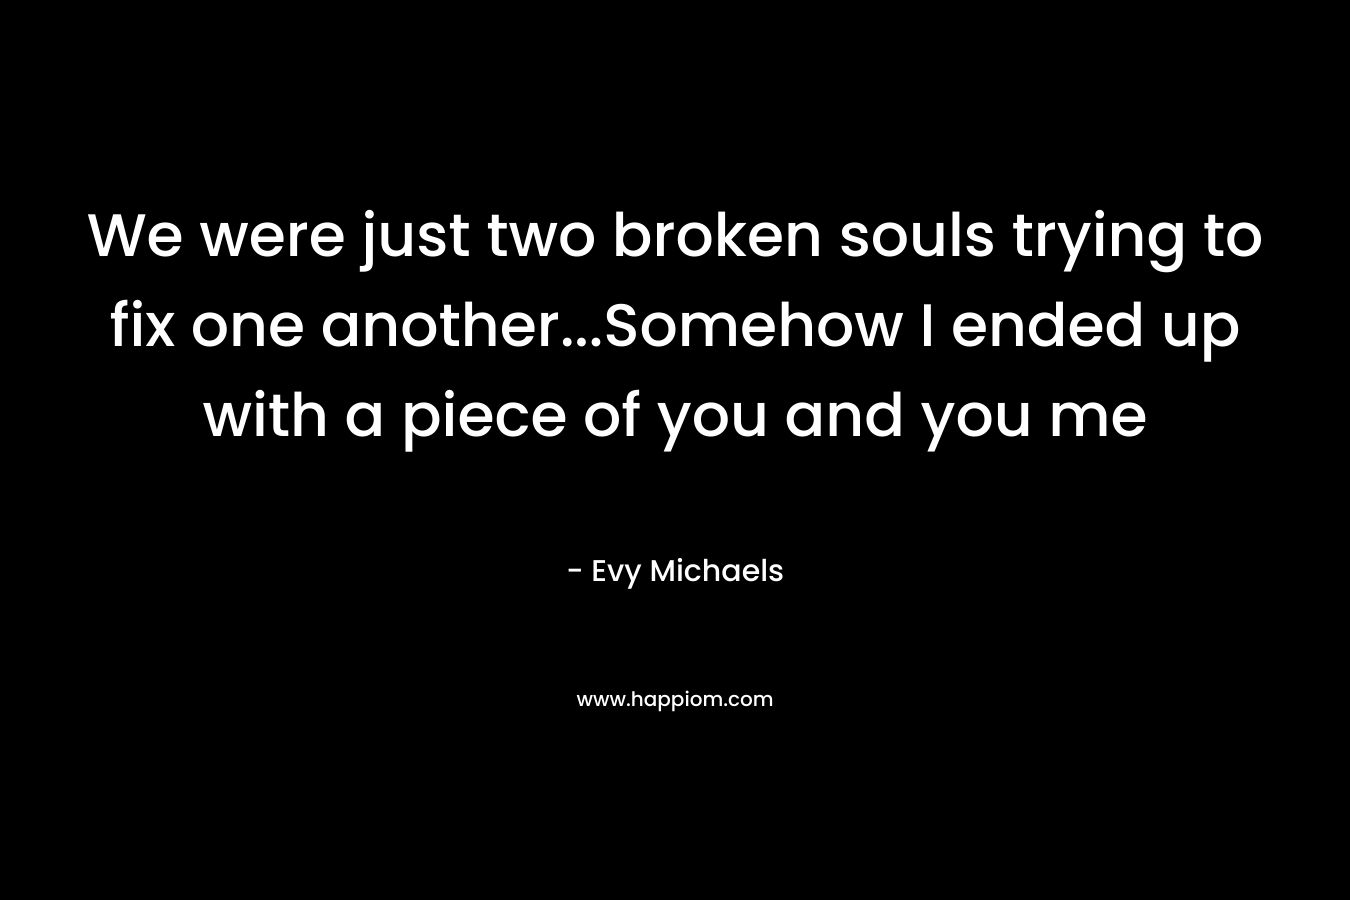 We were just two broken souls trying to fix one another...Somehow I ended up with a piece of you and you me